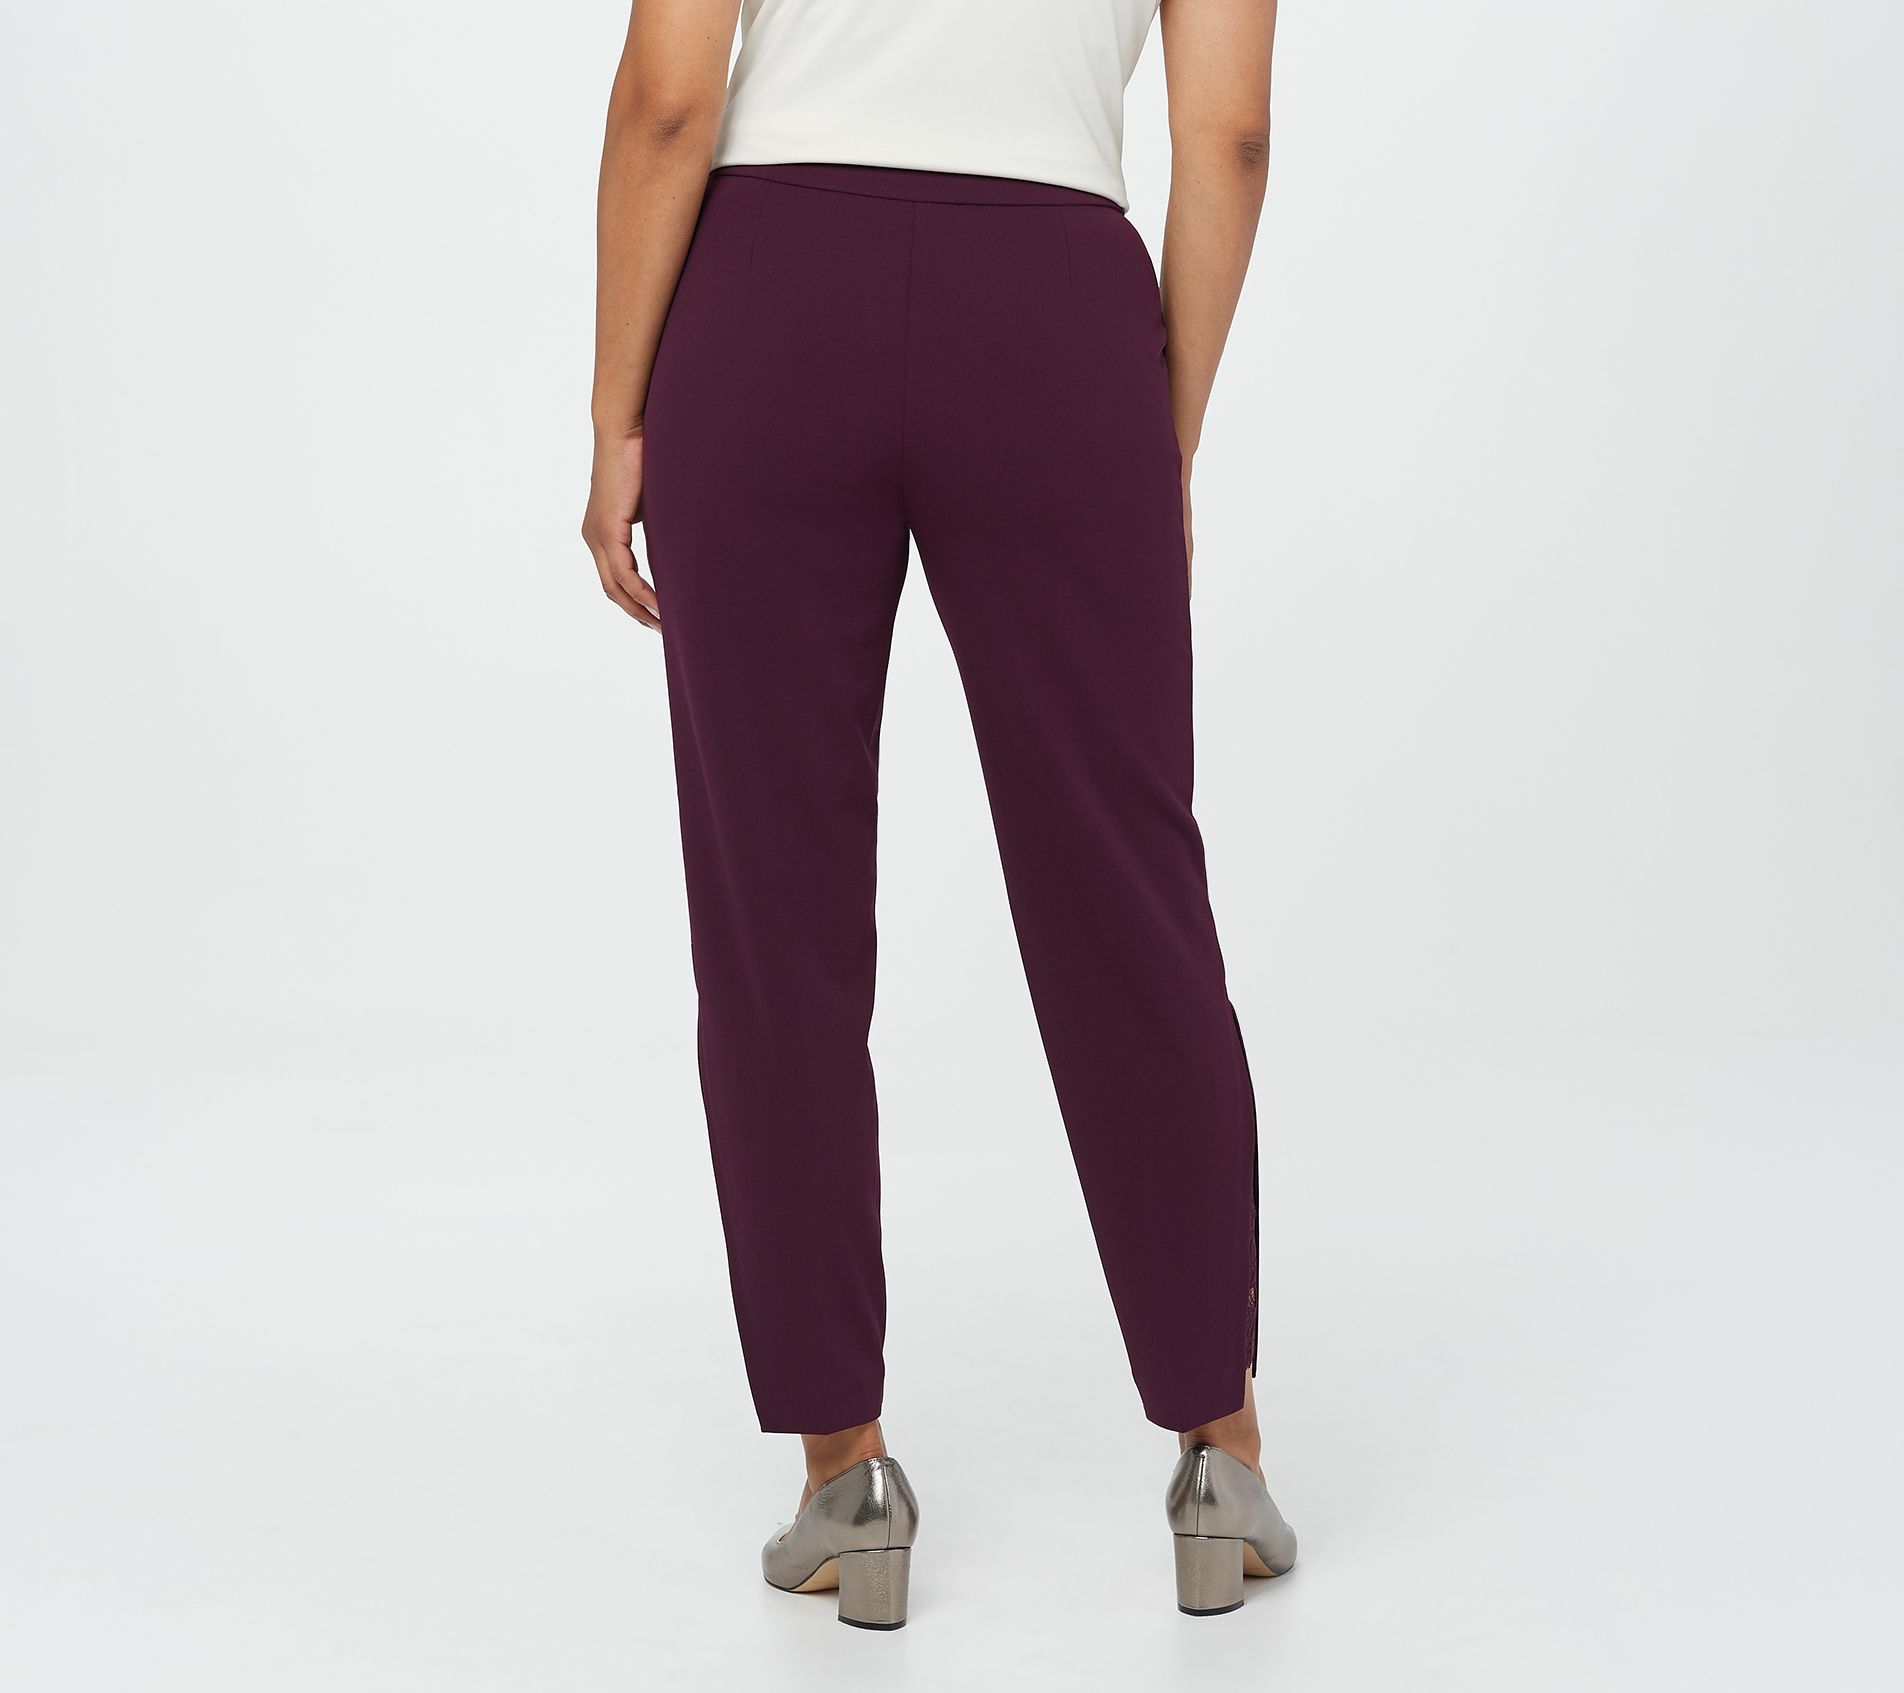 Dennis Basso Luxe Crepe Pull-On Ankle Pants w/ Lace Insert - QVC.com